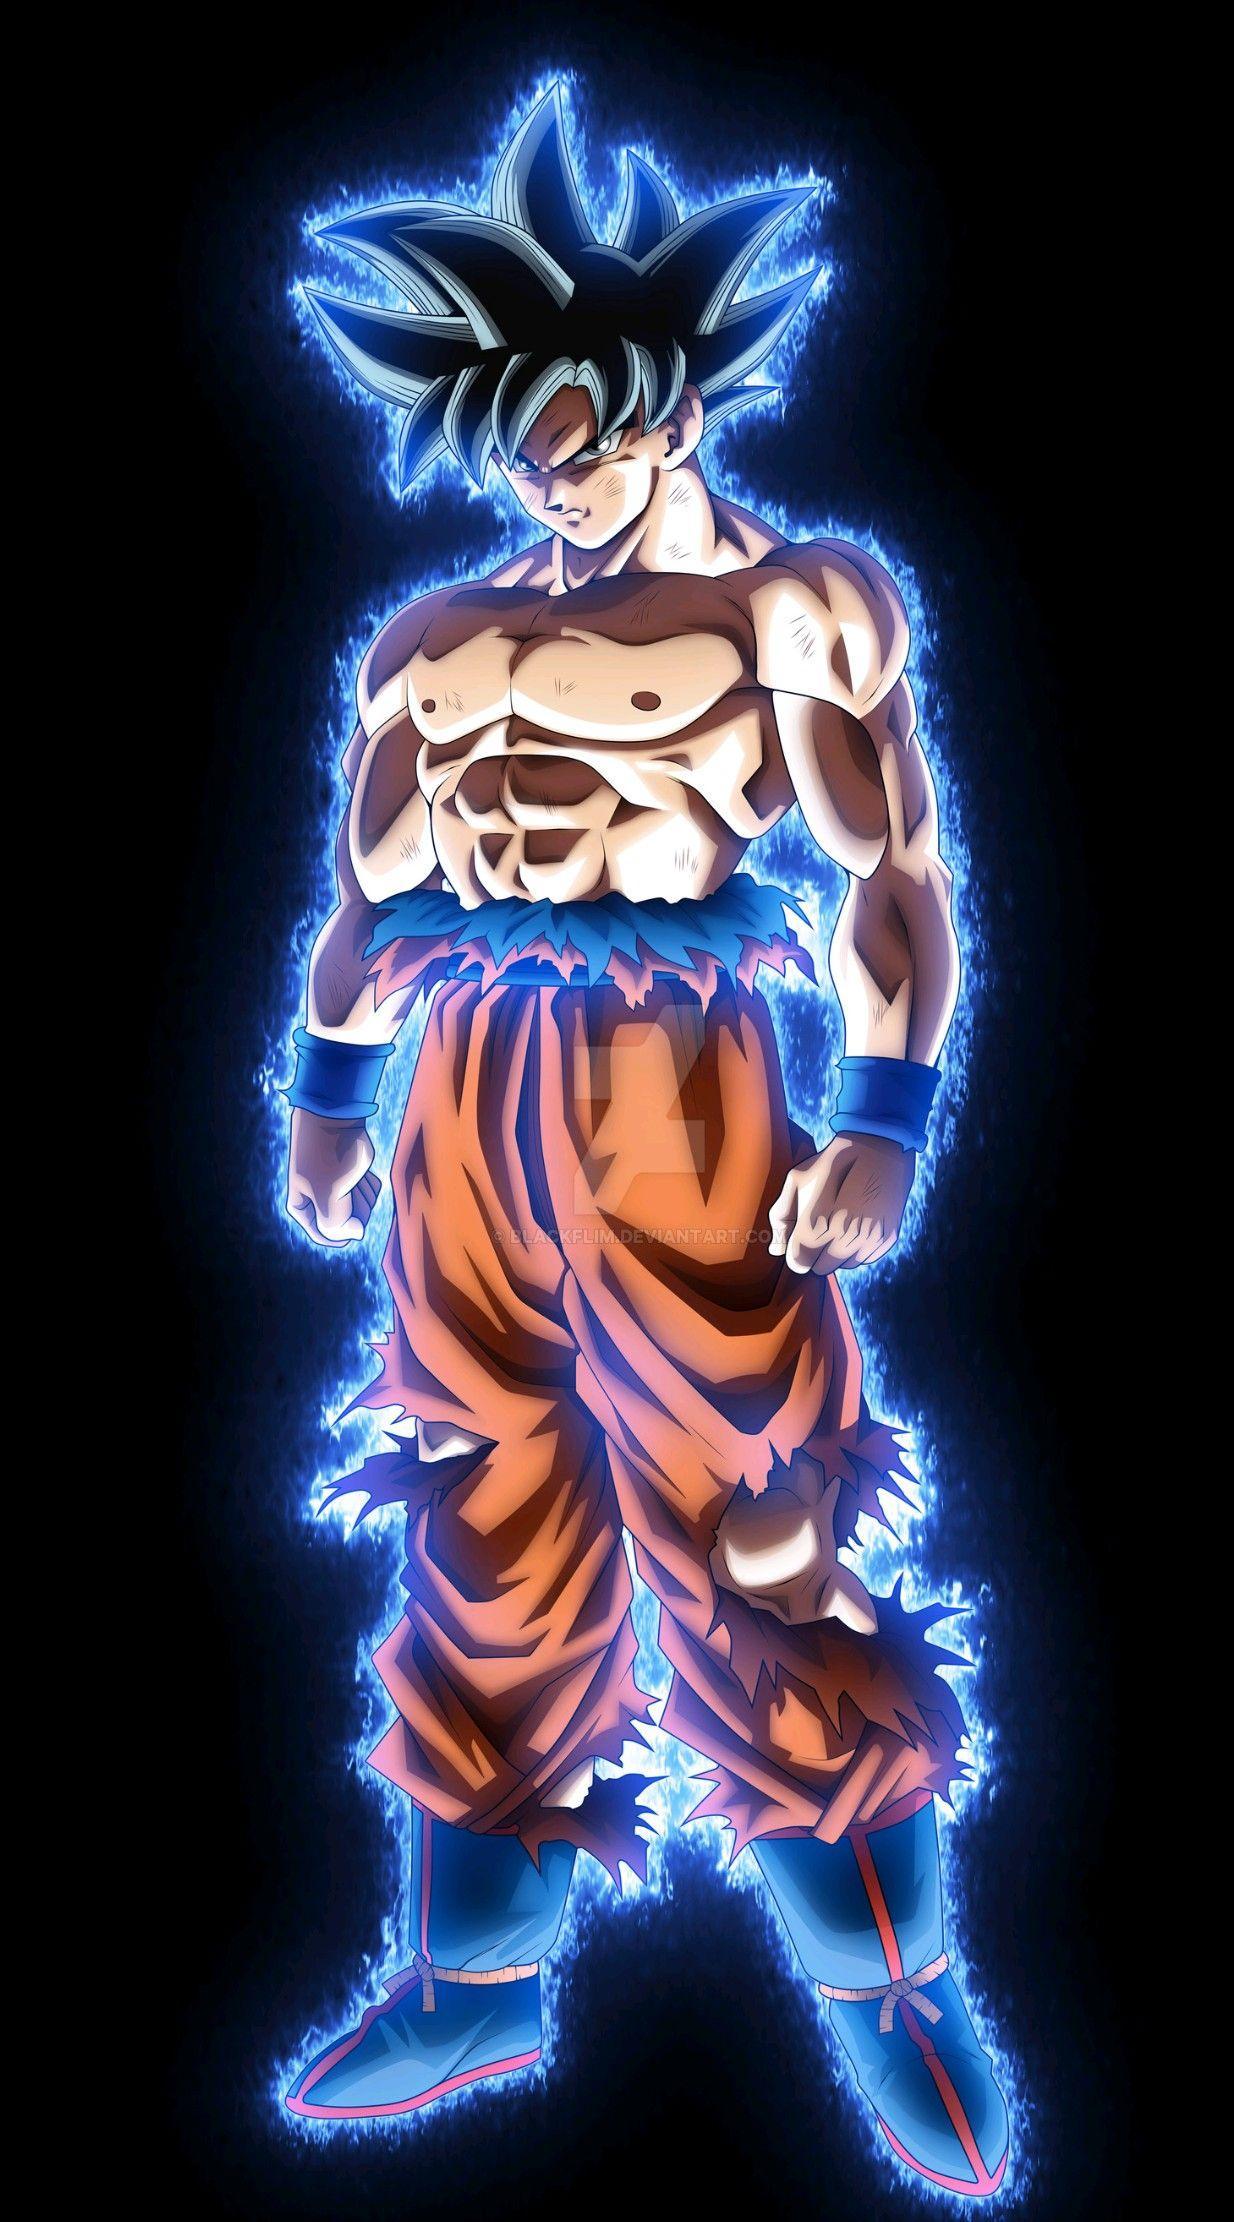 Featured image of post 1080P Goku Wallpaper See more naruto goku wallpaper goku vs superman wallpaper goku god wallpaper goku wallpaper goku vs broly wallpaper dragon ball looking for the best goku wallpaper